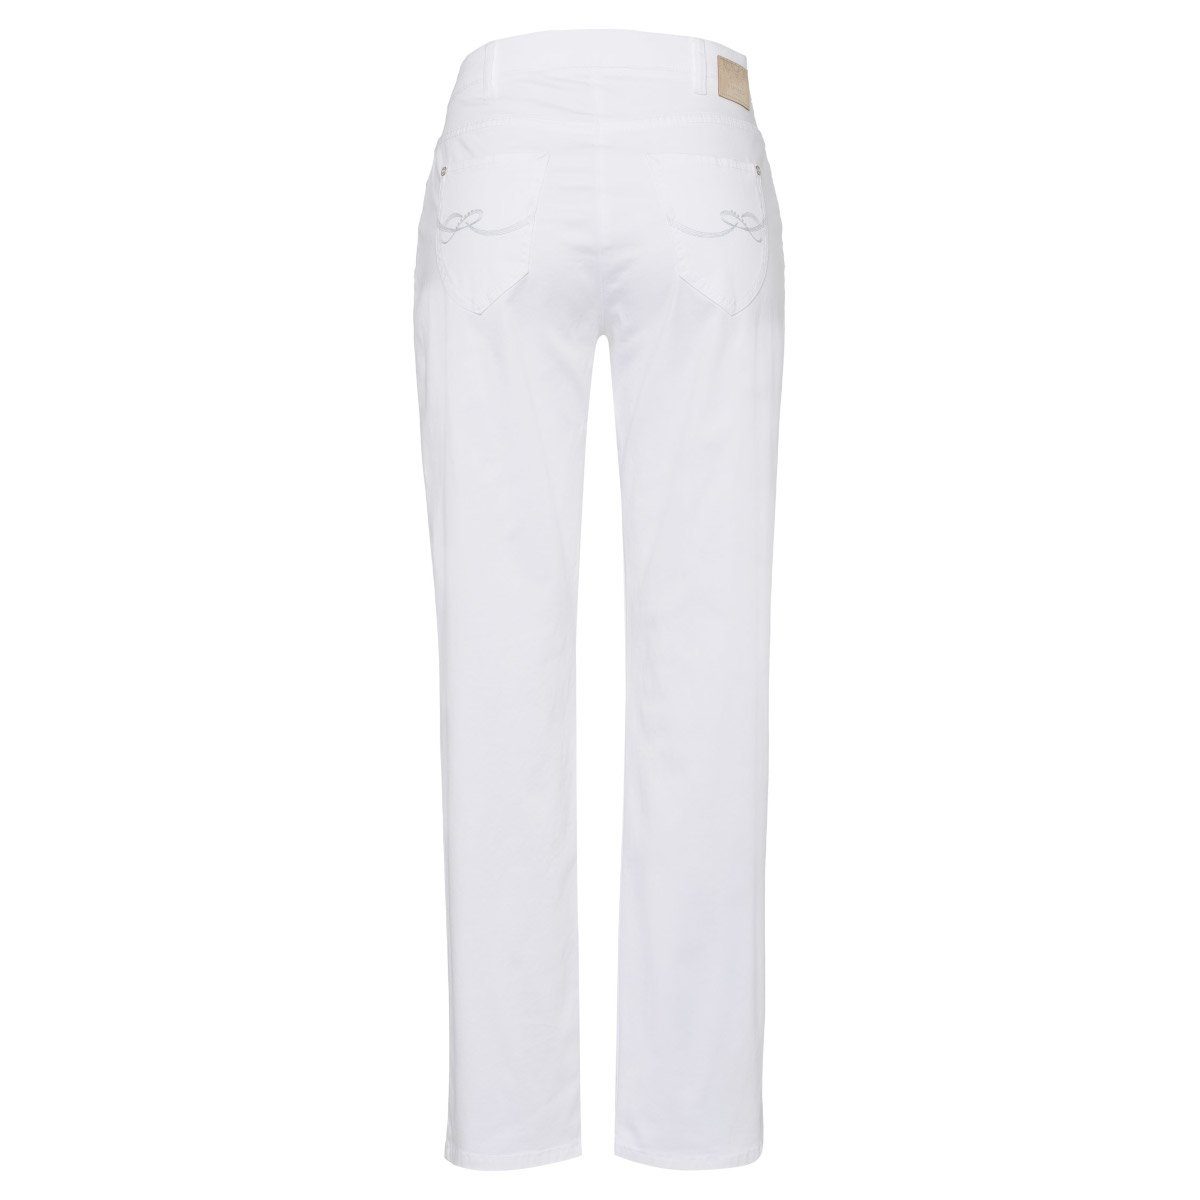 Fay COMFORT BRAX FIT by Corry Comfort weiß RAPHAELA Plus 5-Pocket-Jeans